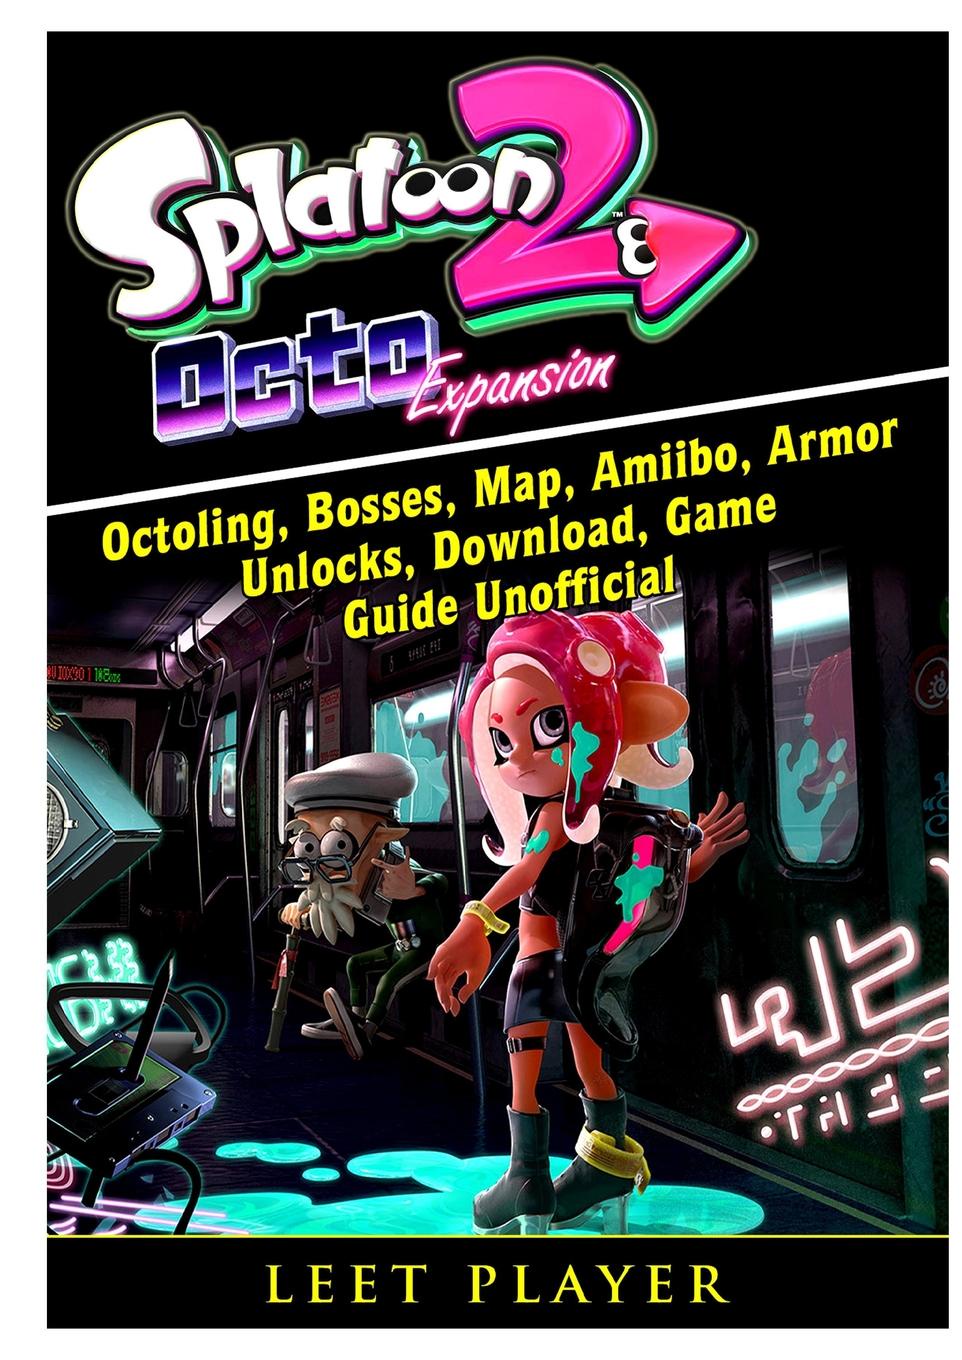 фото Splatoon 2 Octo Expansion, Octoling, Bosses, Map, Amiibo, Armor, Unlocks, Download, Game Guide Unofficial